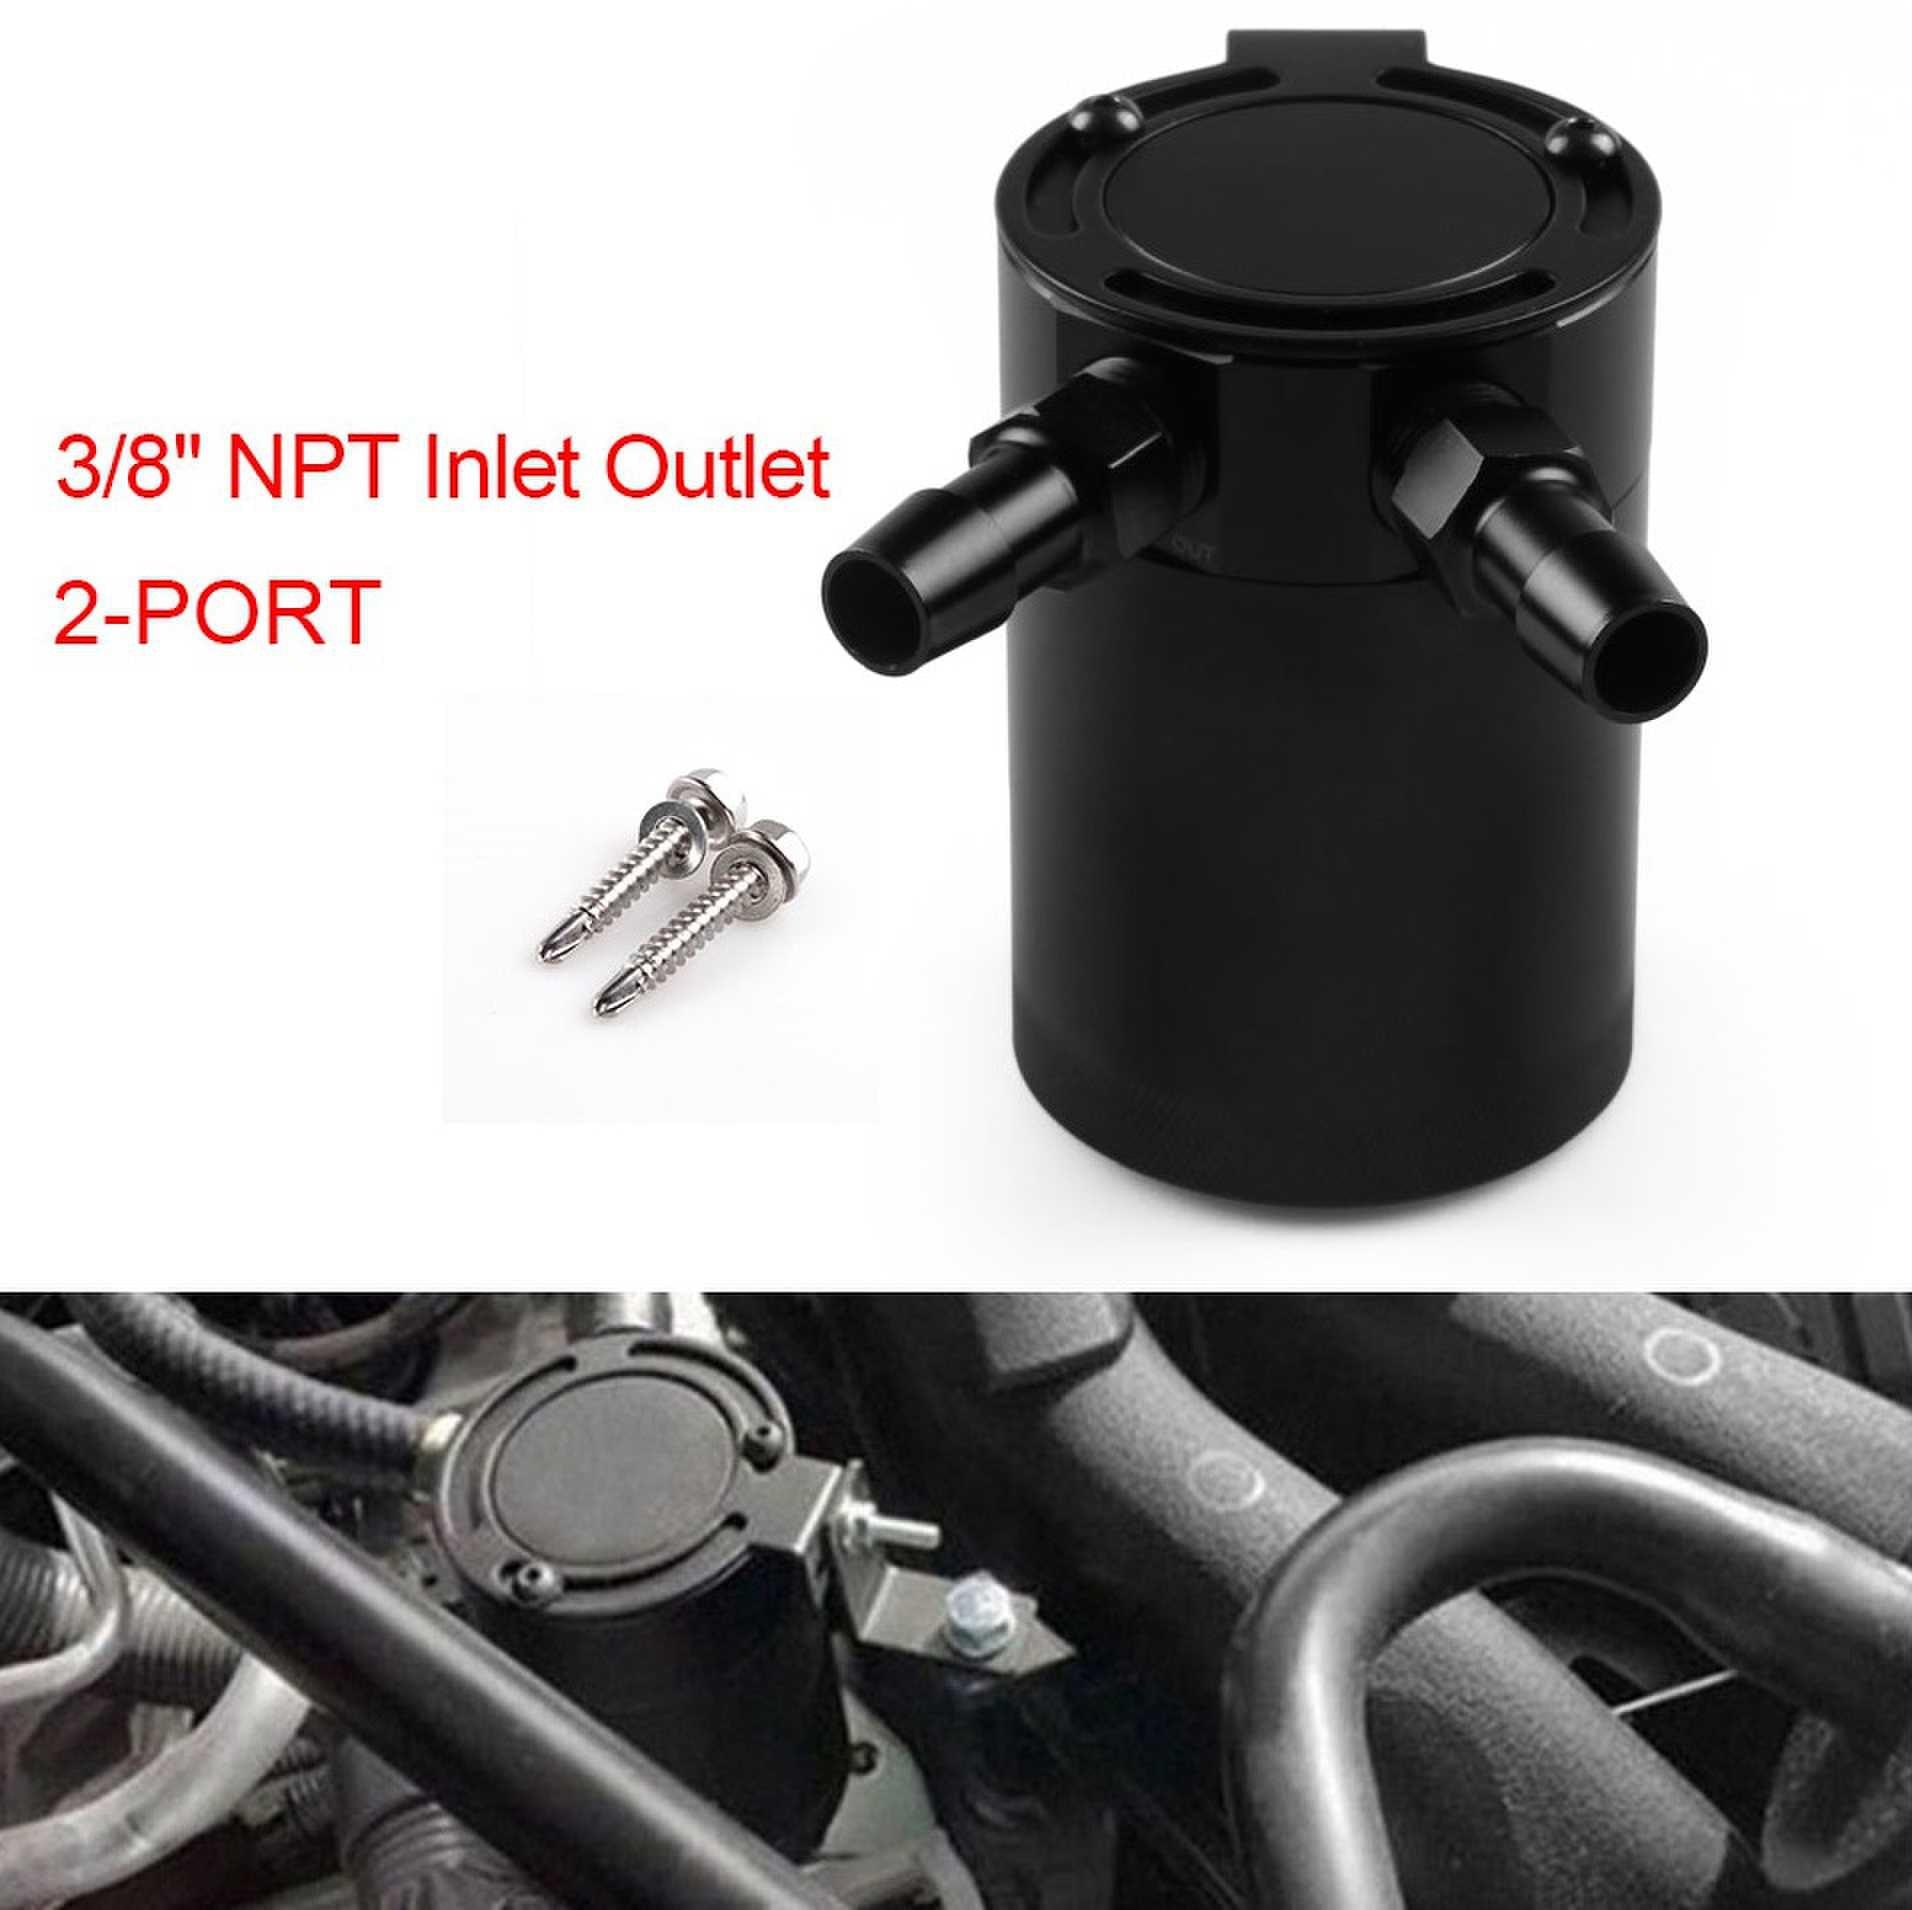 RASTP Universal 3/8" NPT Inlet Outlet 2-Port Compact Baffled Oil Catch Can/Tank Air-Oil Separtor - RASTP